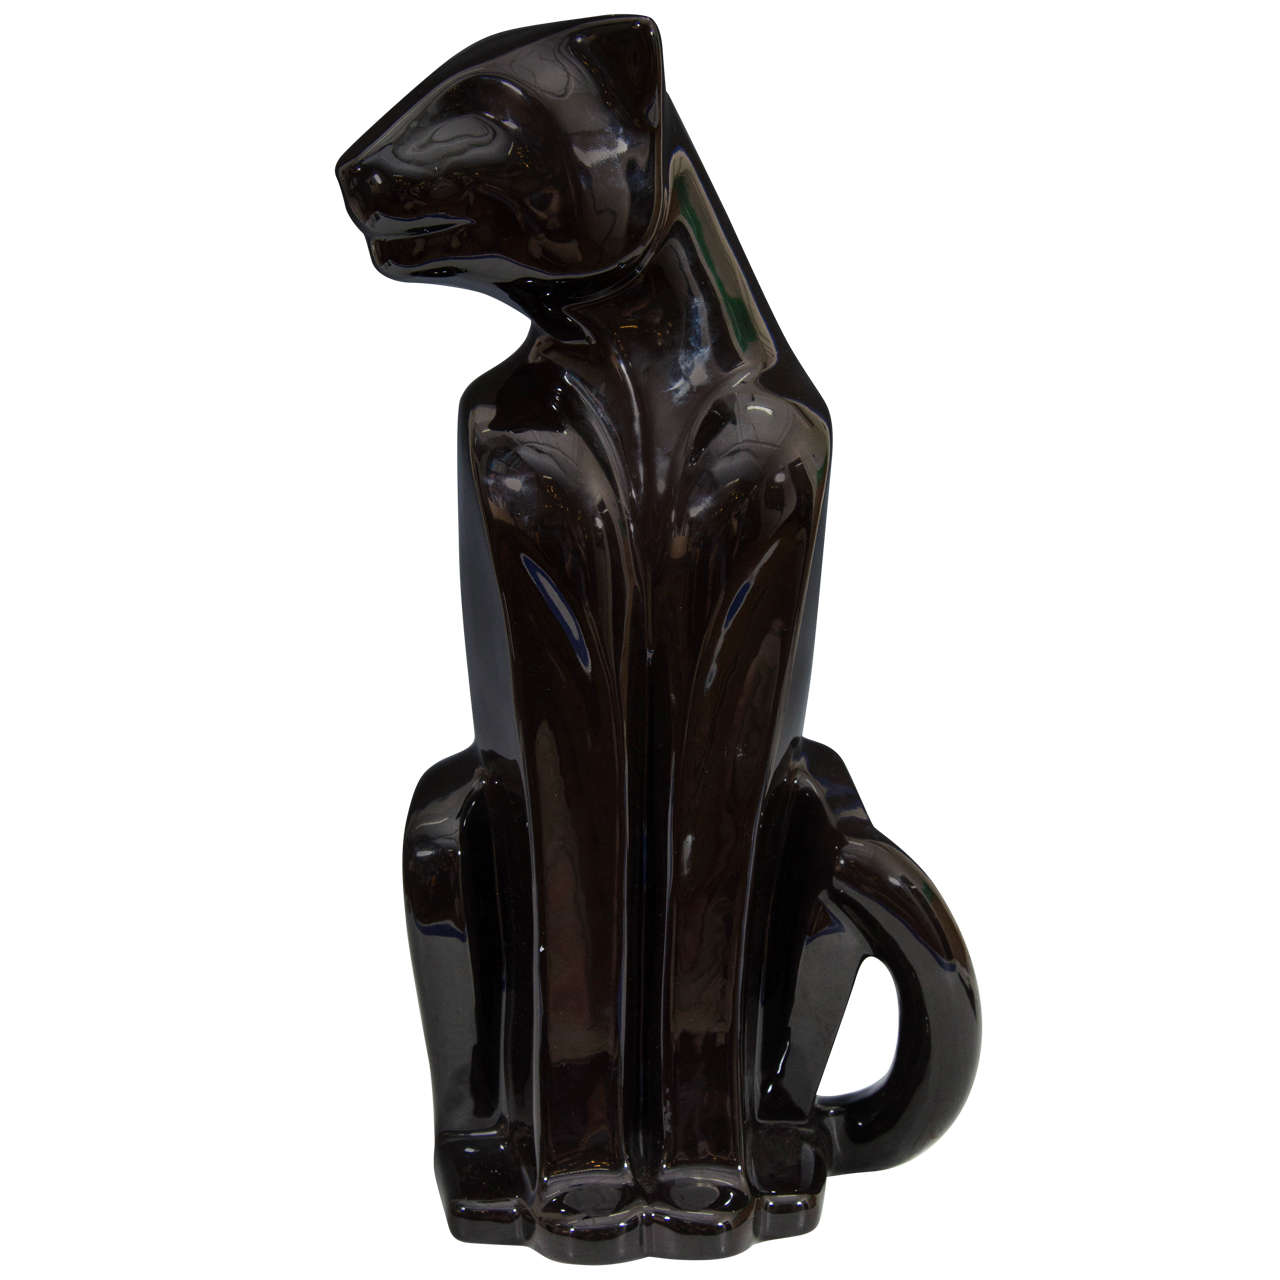 Vintage Art Deco Style Haeger Pottery Panther